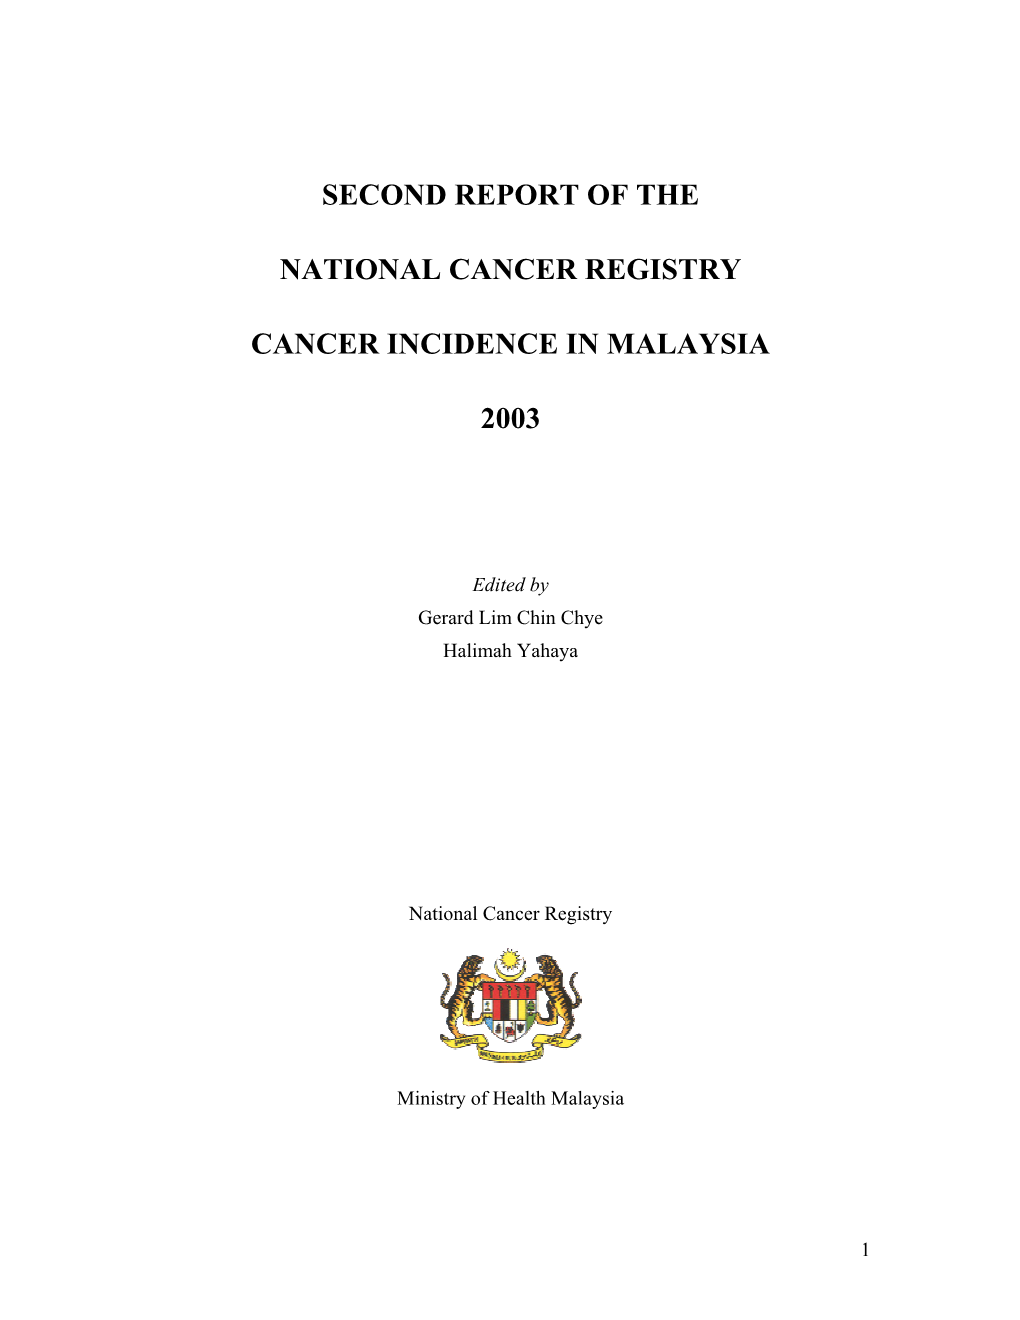 Second Report of the National Cancer Registry Cancer Incidence In